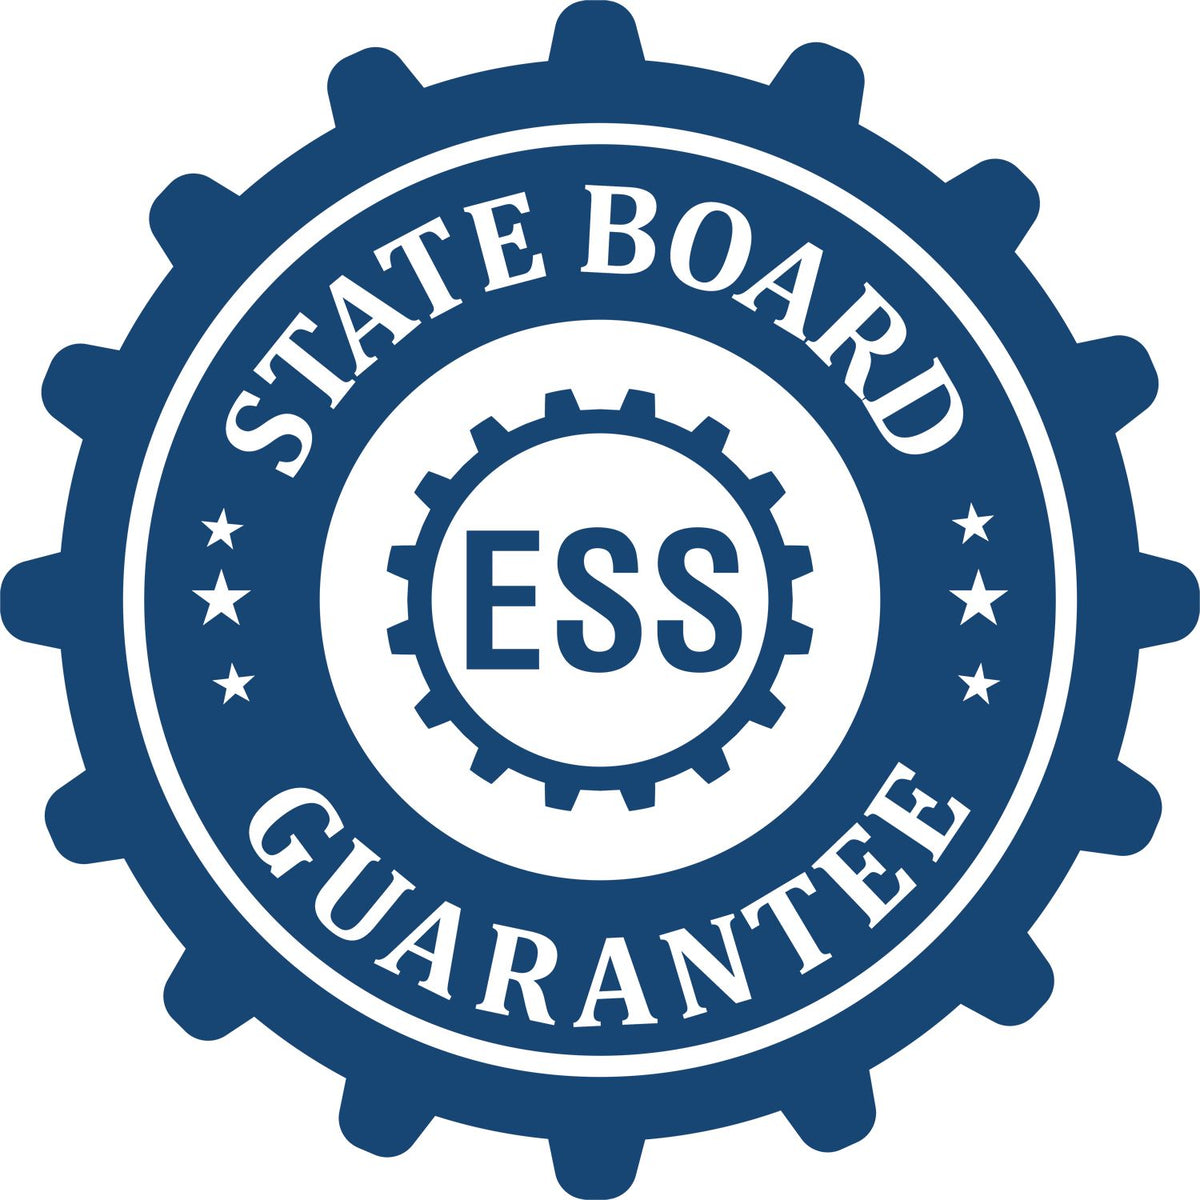 An emblem in a gear shape illustrating a state board guarantee for the State of Mississippi Long Reach Architectural Embossing Seal product.